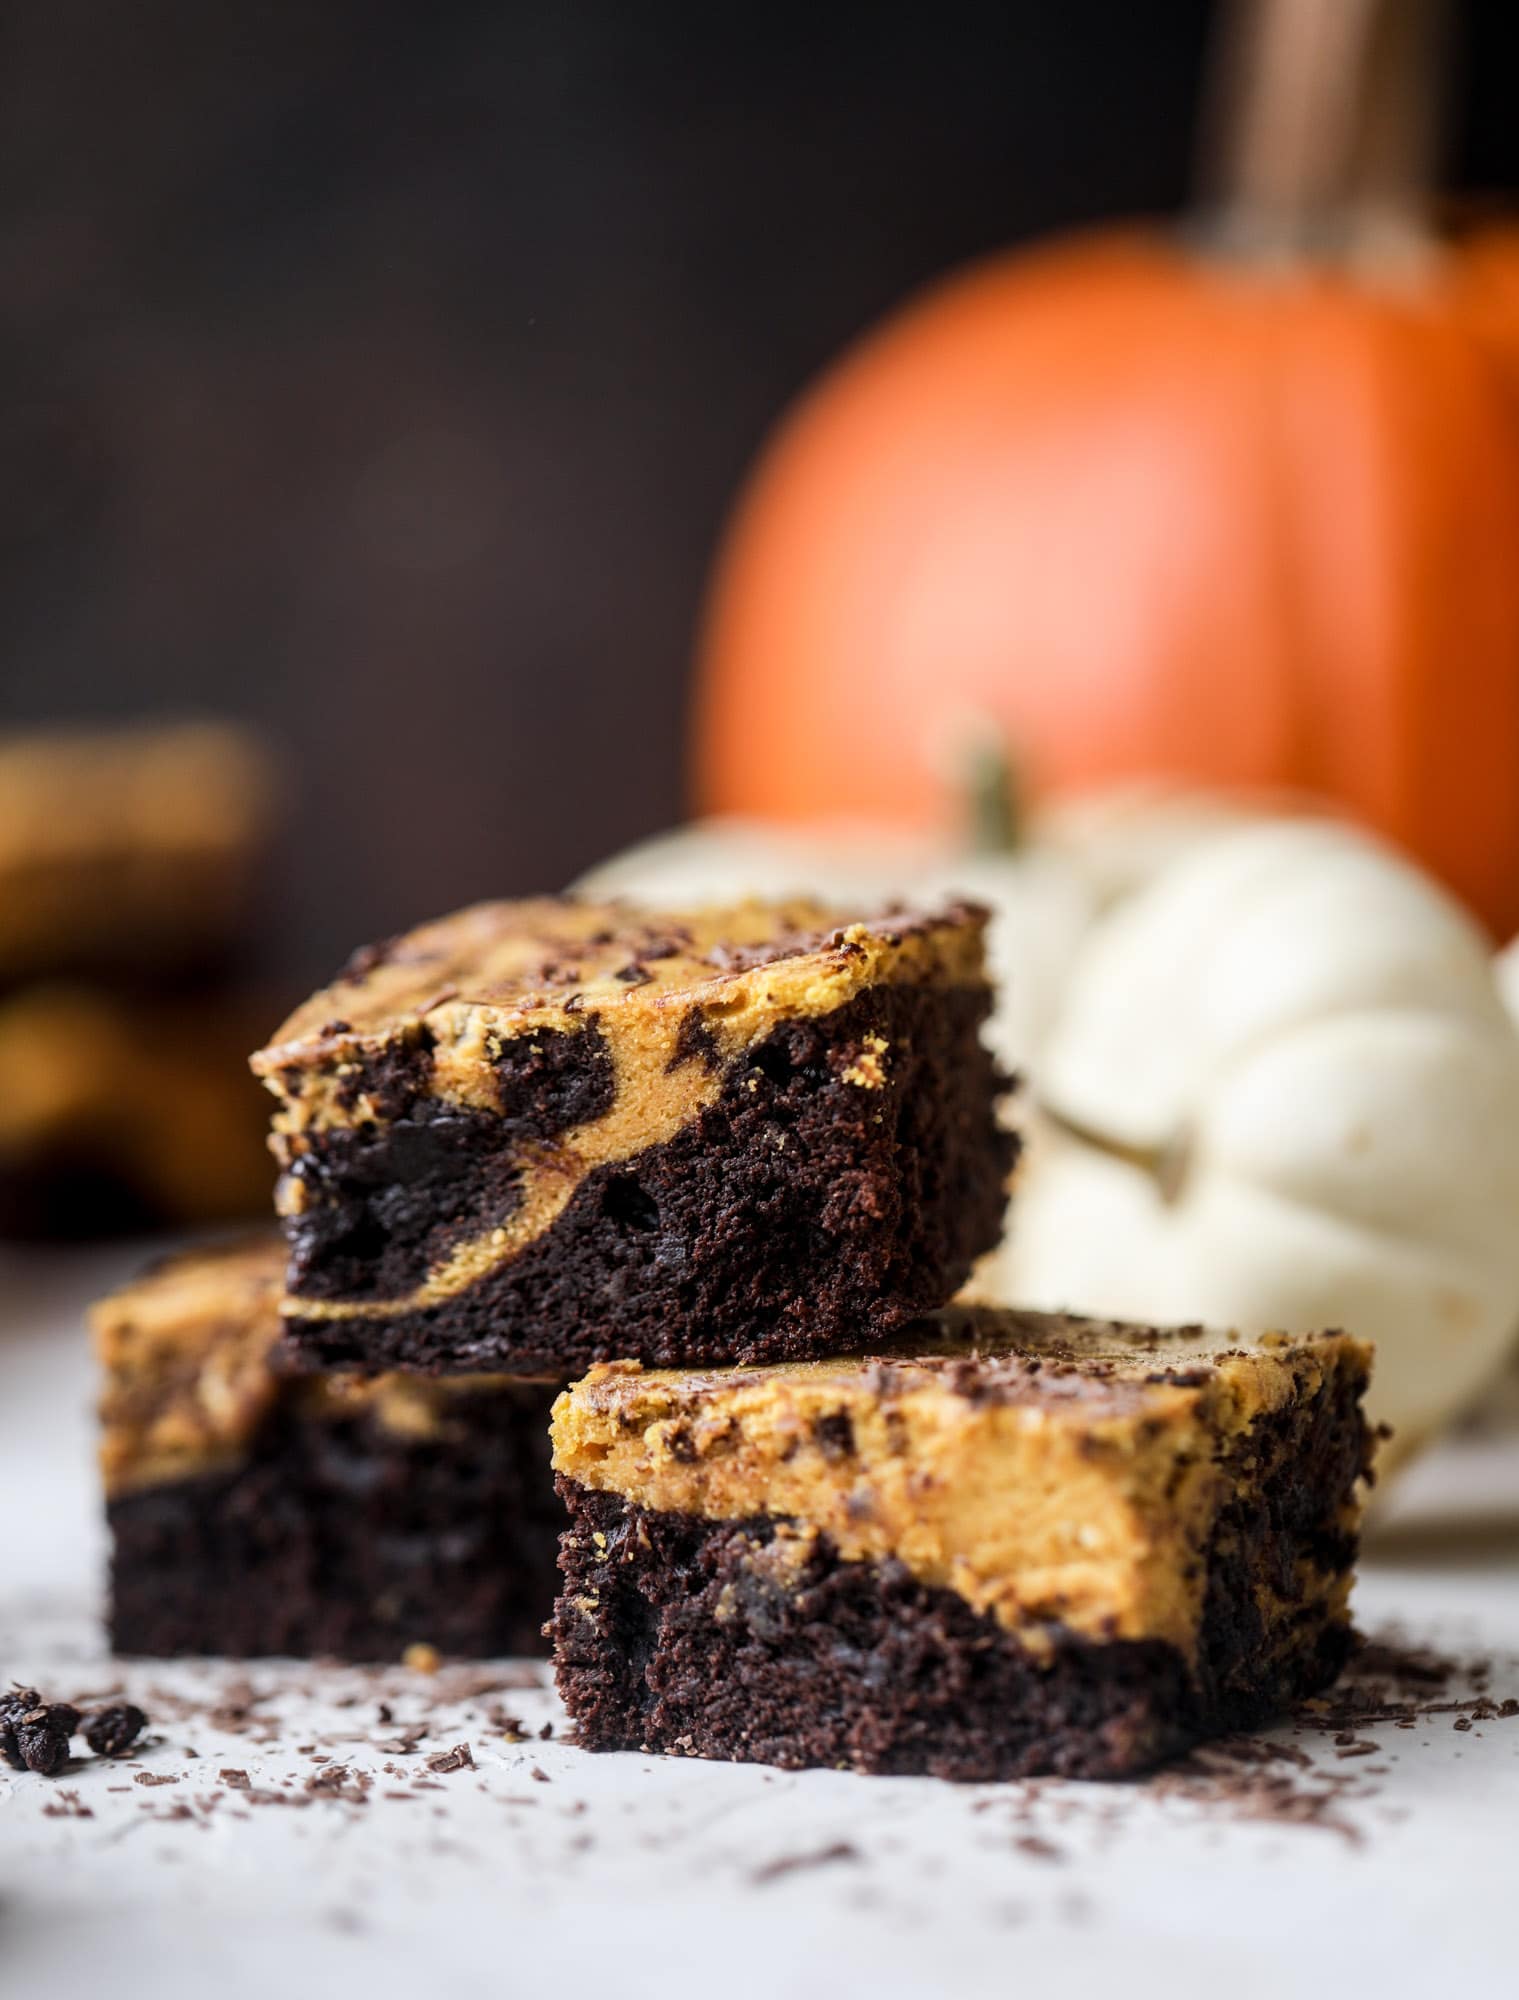 These pumpkin brownies have a fudgy layer of chocolate on the bottom and a silky layer of pumpkin on top! They are so delicious and rich and perfect for fall. The pumpkin brownies come together easily and can be made ahead of time too! I howsweeteats.com #pumpkin #brownies